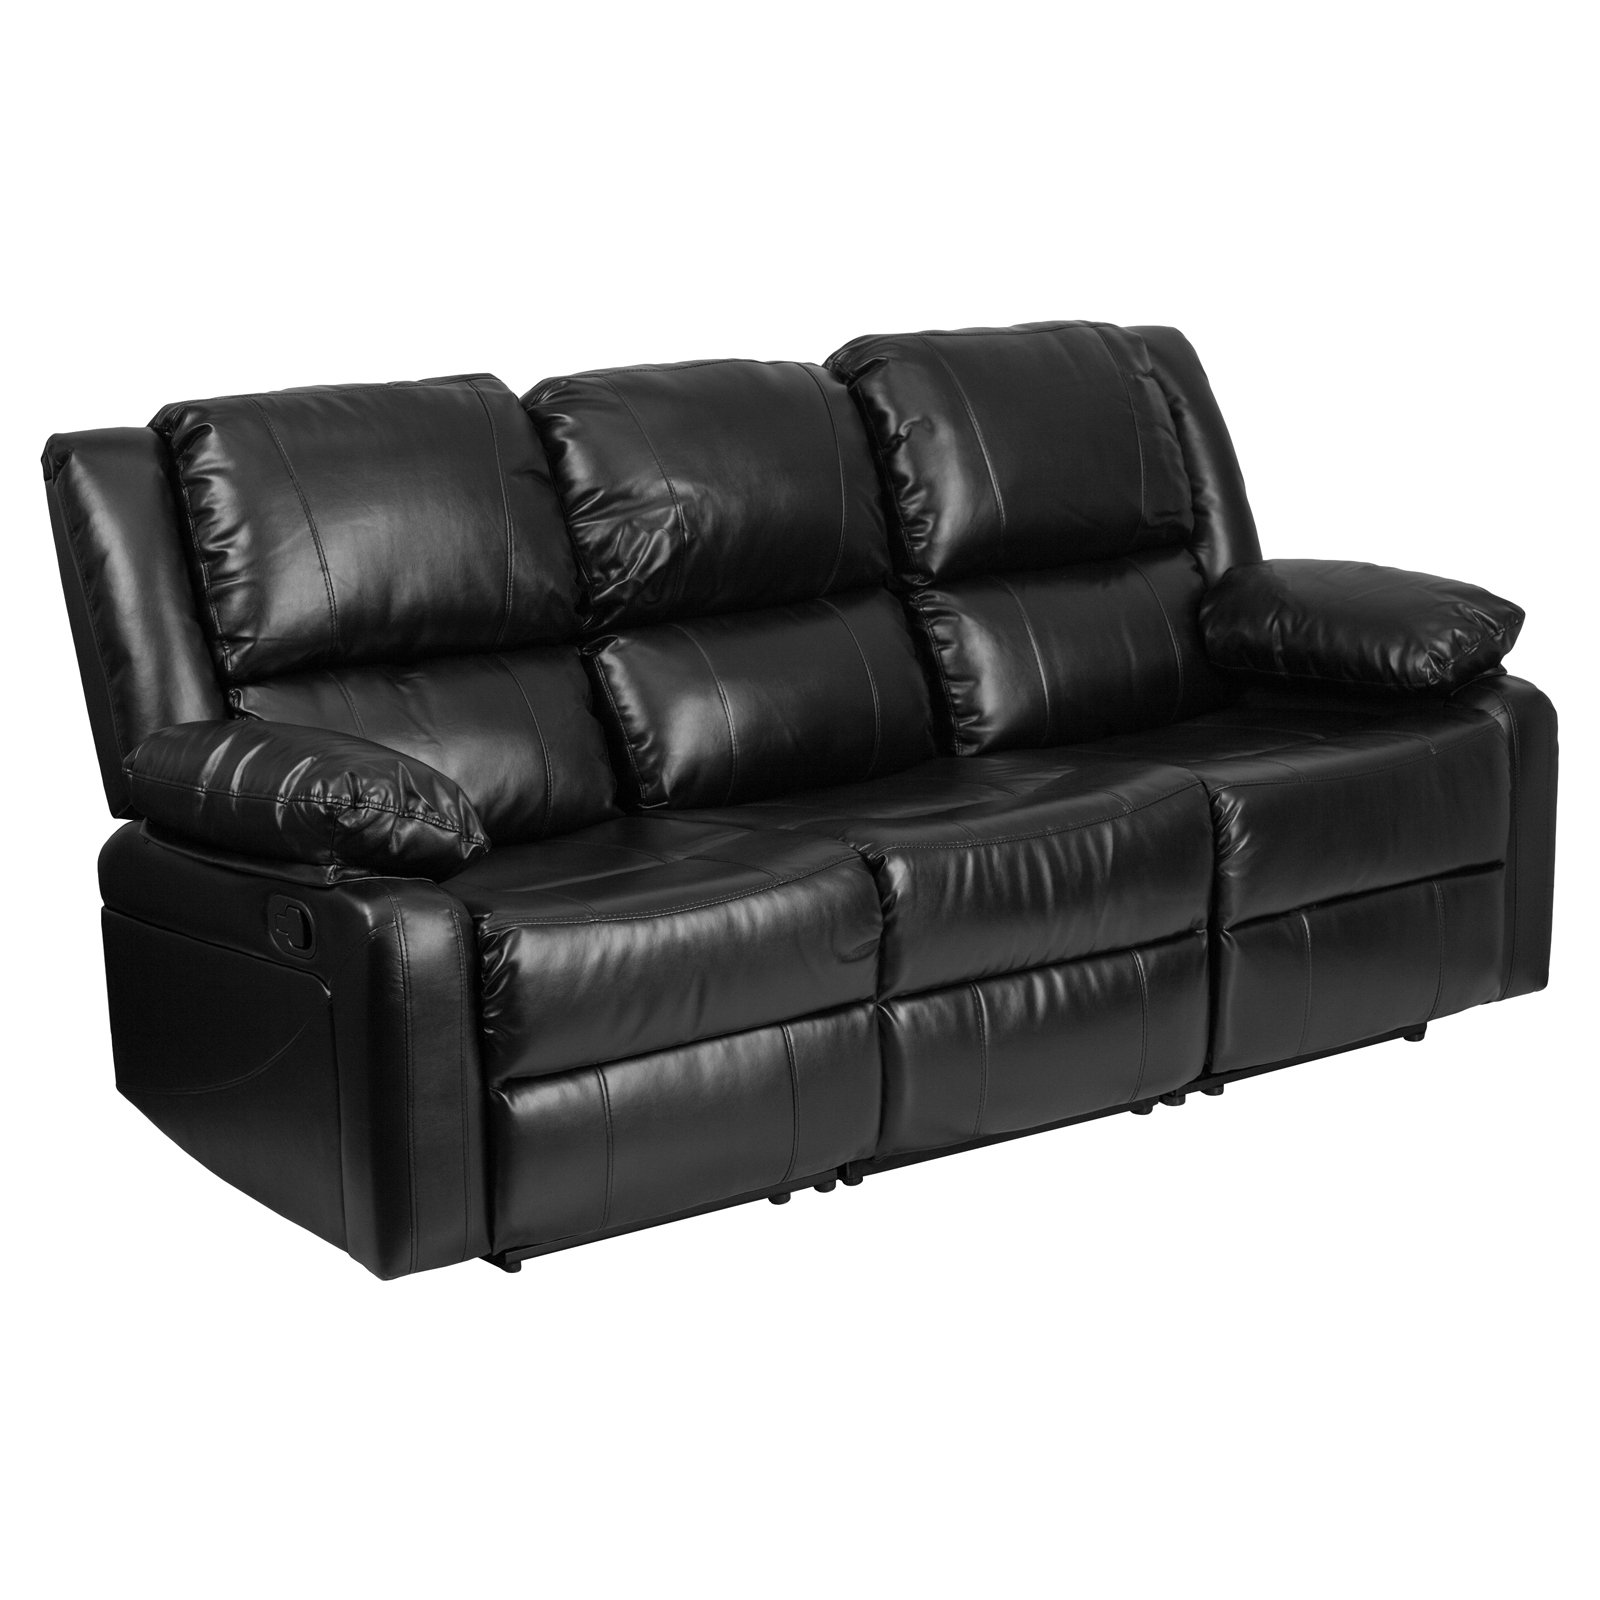 Flash Furniture Harmony Series Black Leather Sofa with Two Built-In  Recliners - Traveller Location